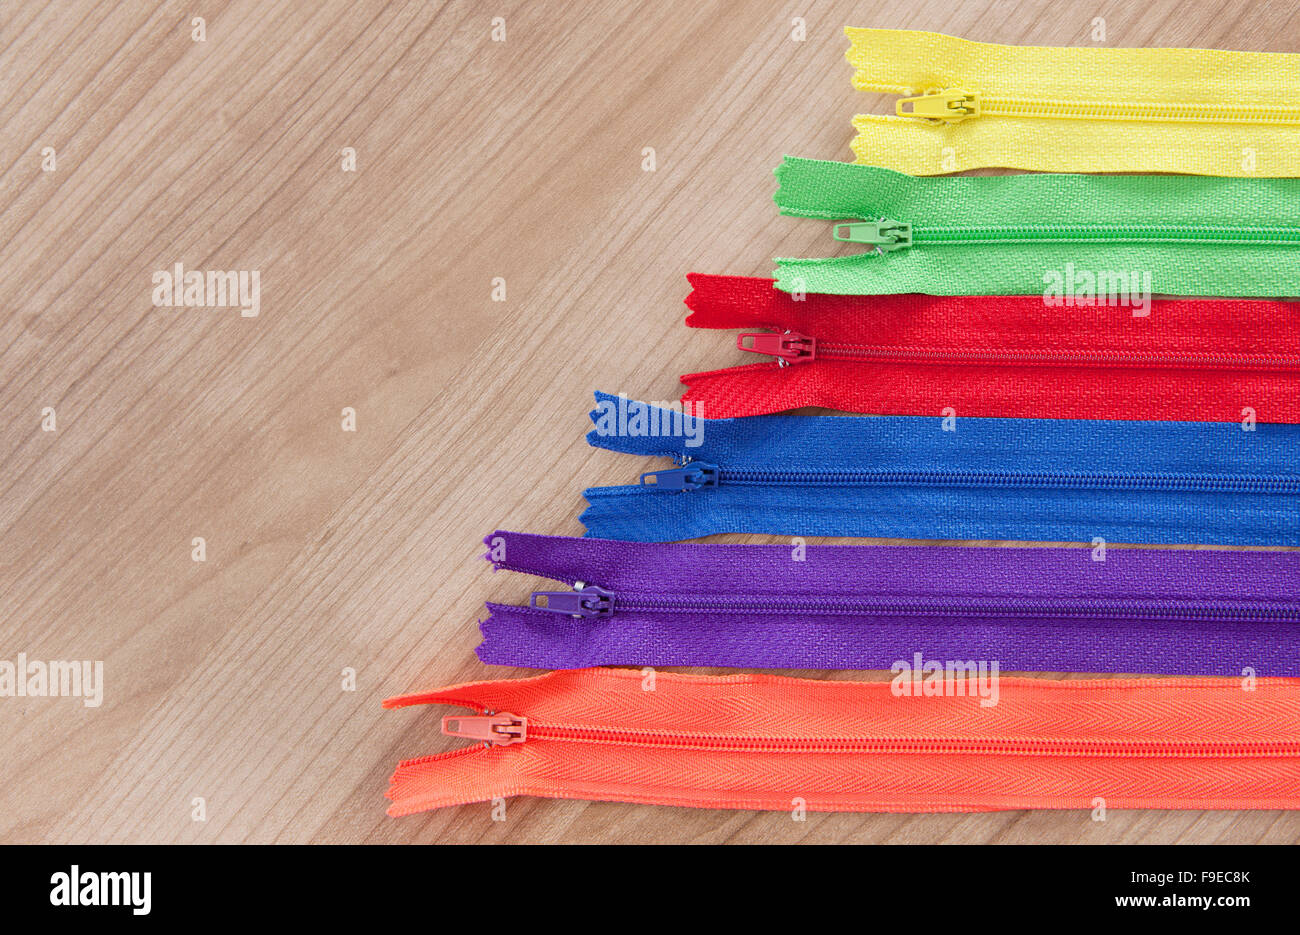 different colorful zippers in front of wood background Stock Photo